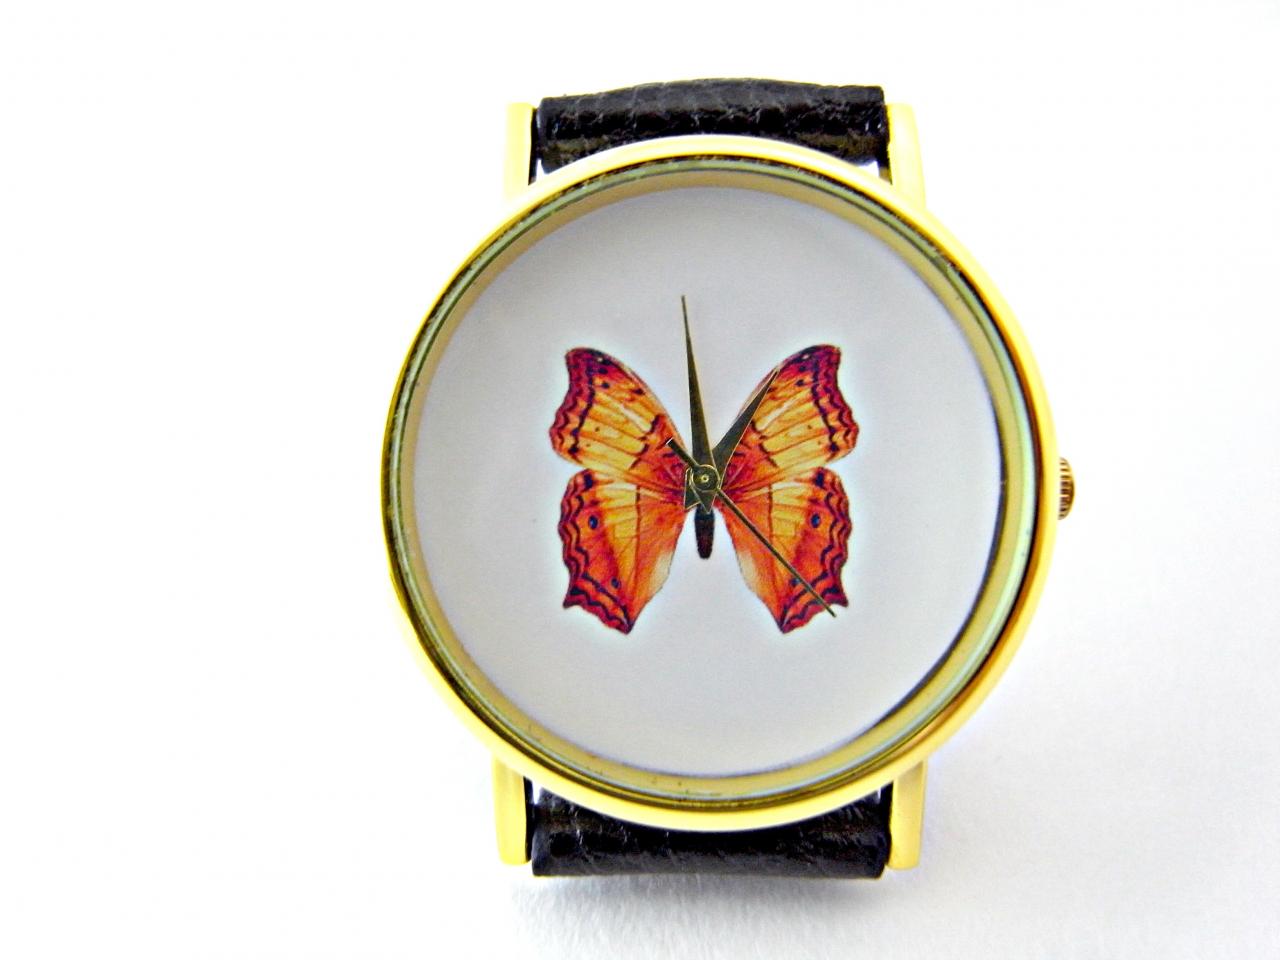 Butterfly Leather Wrist Watches, Woman Man Lady Unisex Watch, Genuine Leather Handmade Unique Watch #36